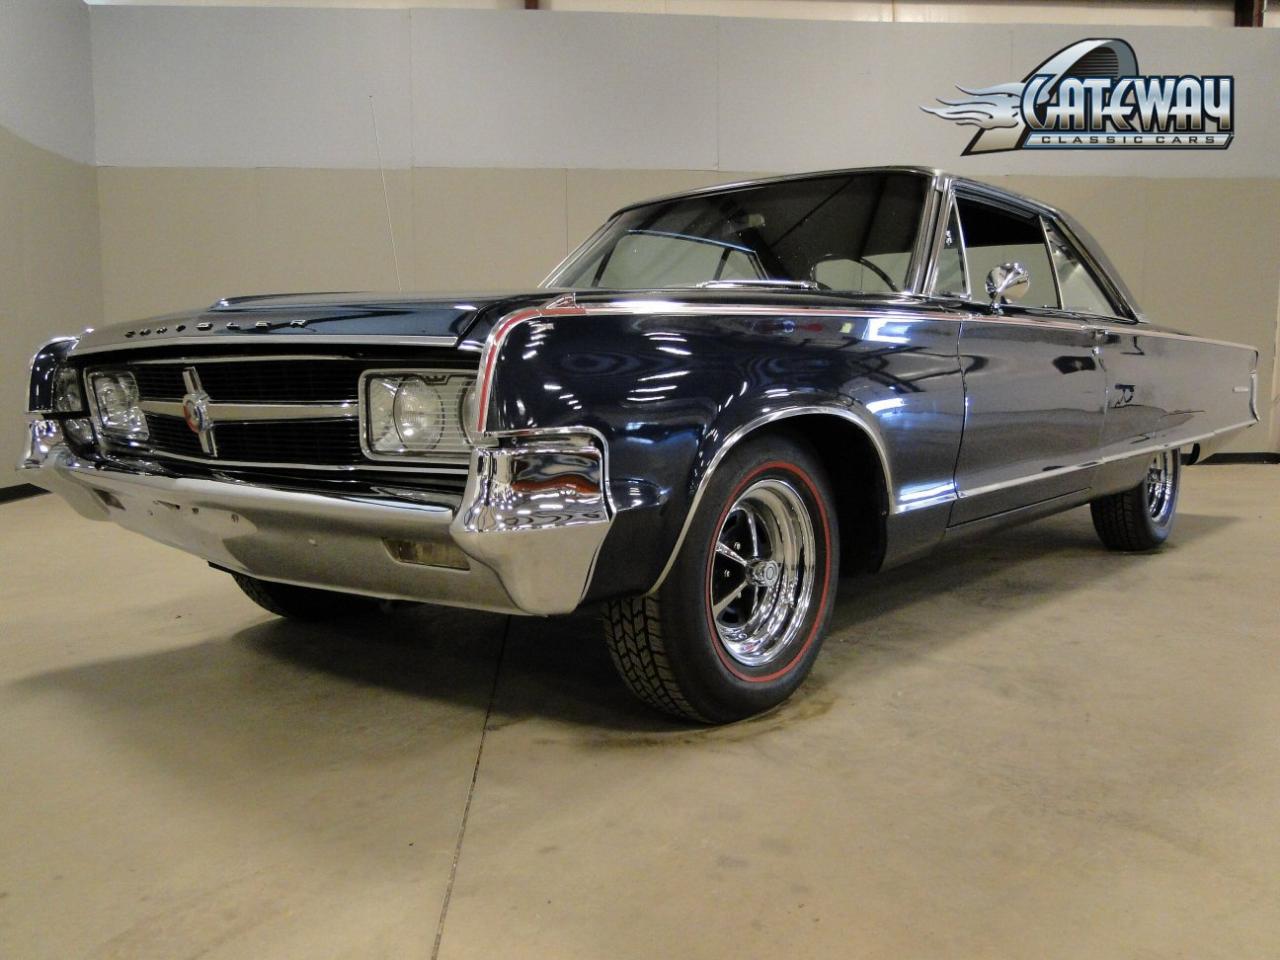 Gateway Classic Cars For Sale Muscle